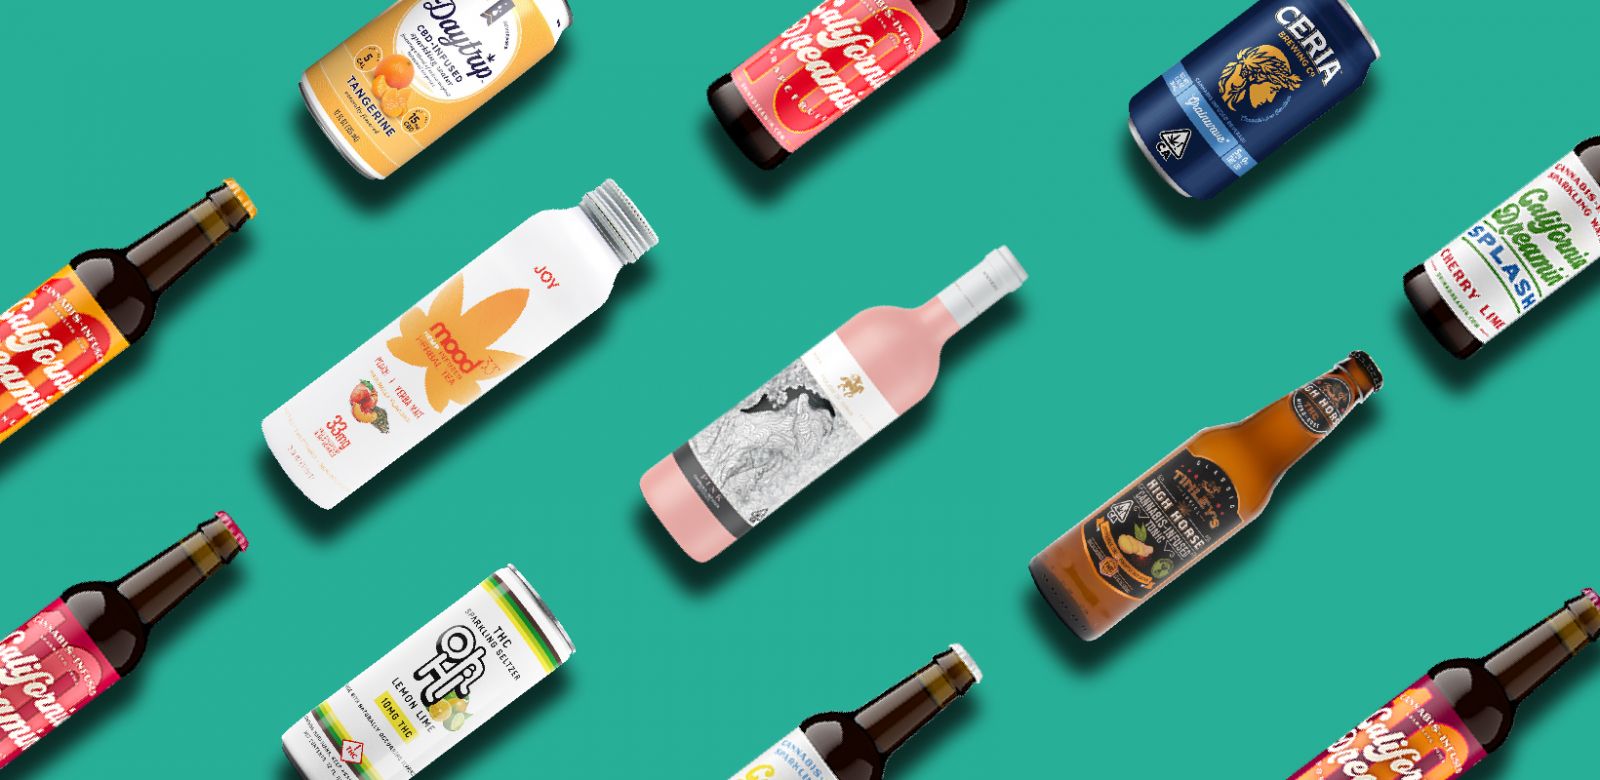 Photo for: Hello World: Meet These World Class Cannabis Beverages Brands